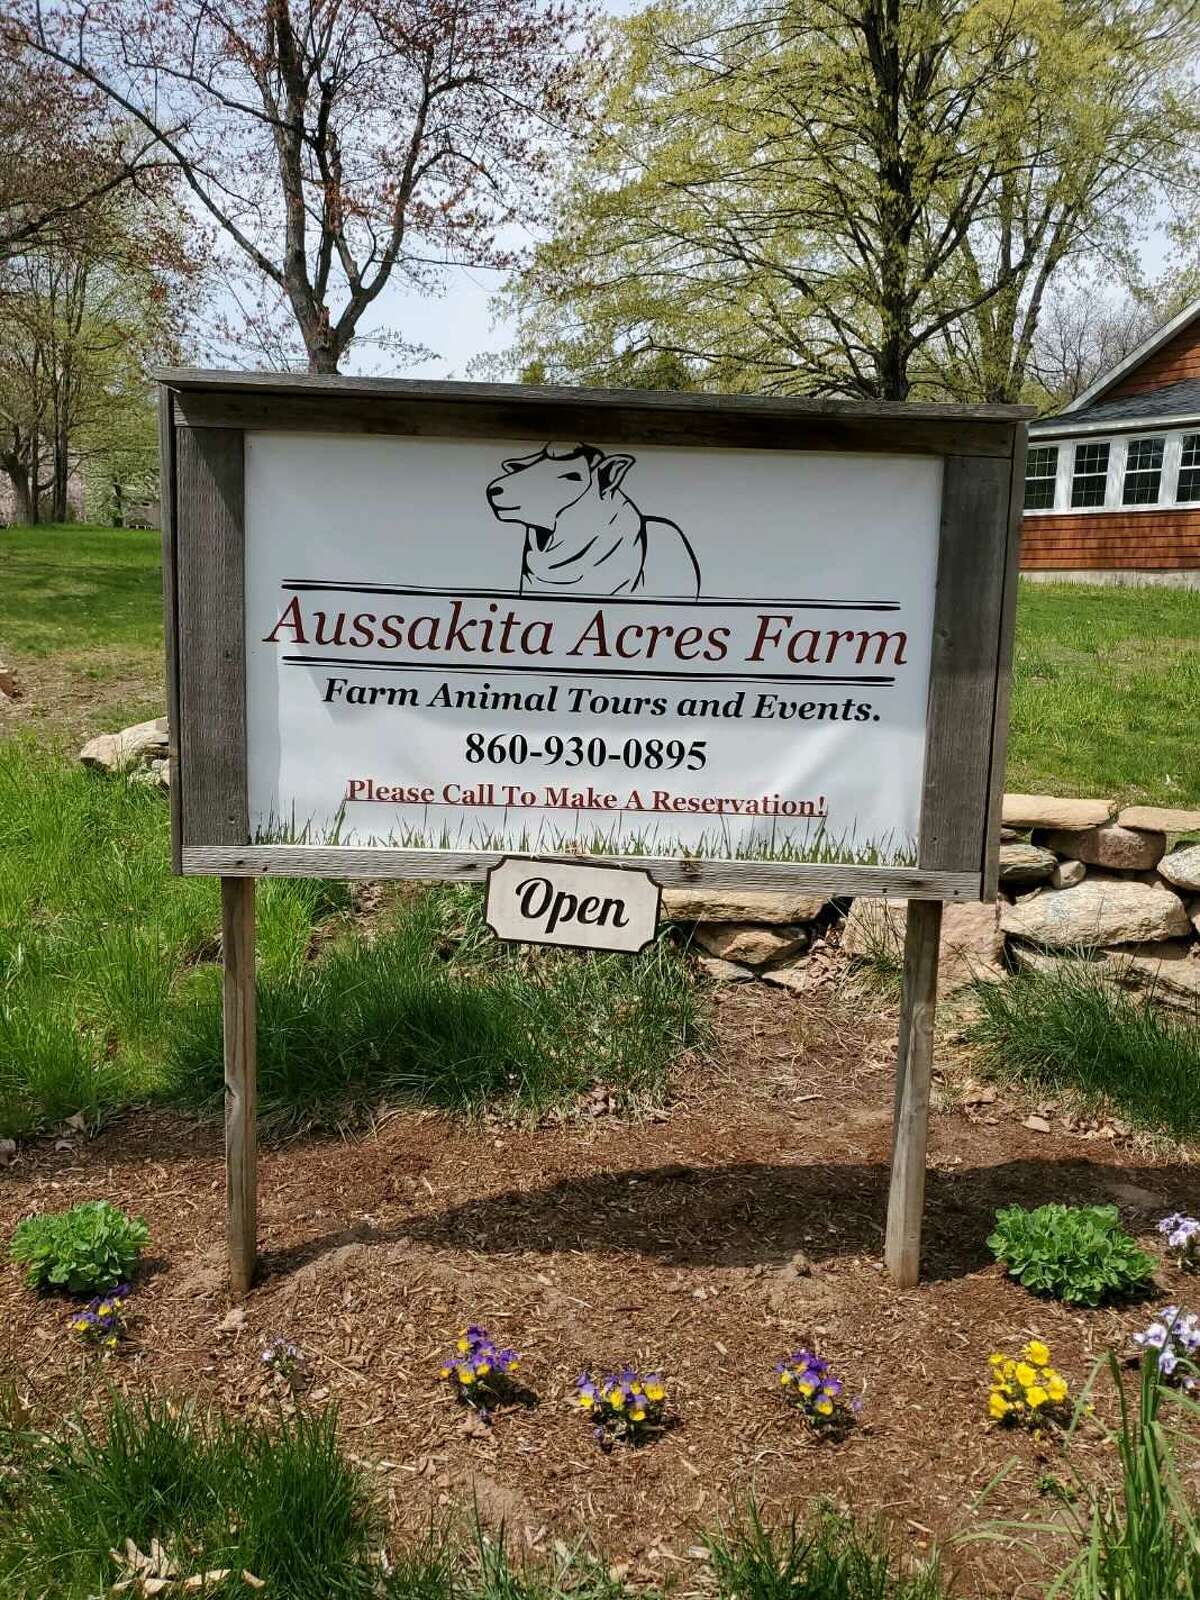 Aussakita Acres Farm in Manchester, Conn. not only has goats on site, it also has alpacas and other farm animals that guests can interact with.